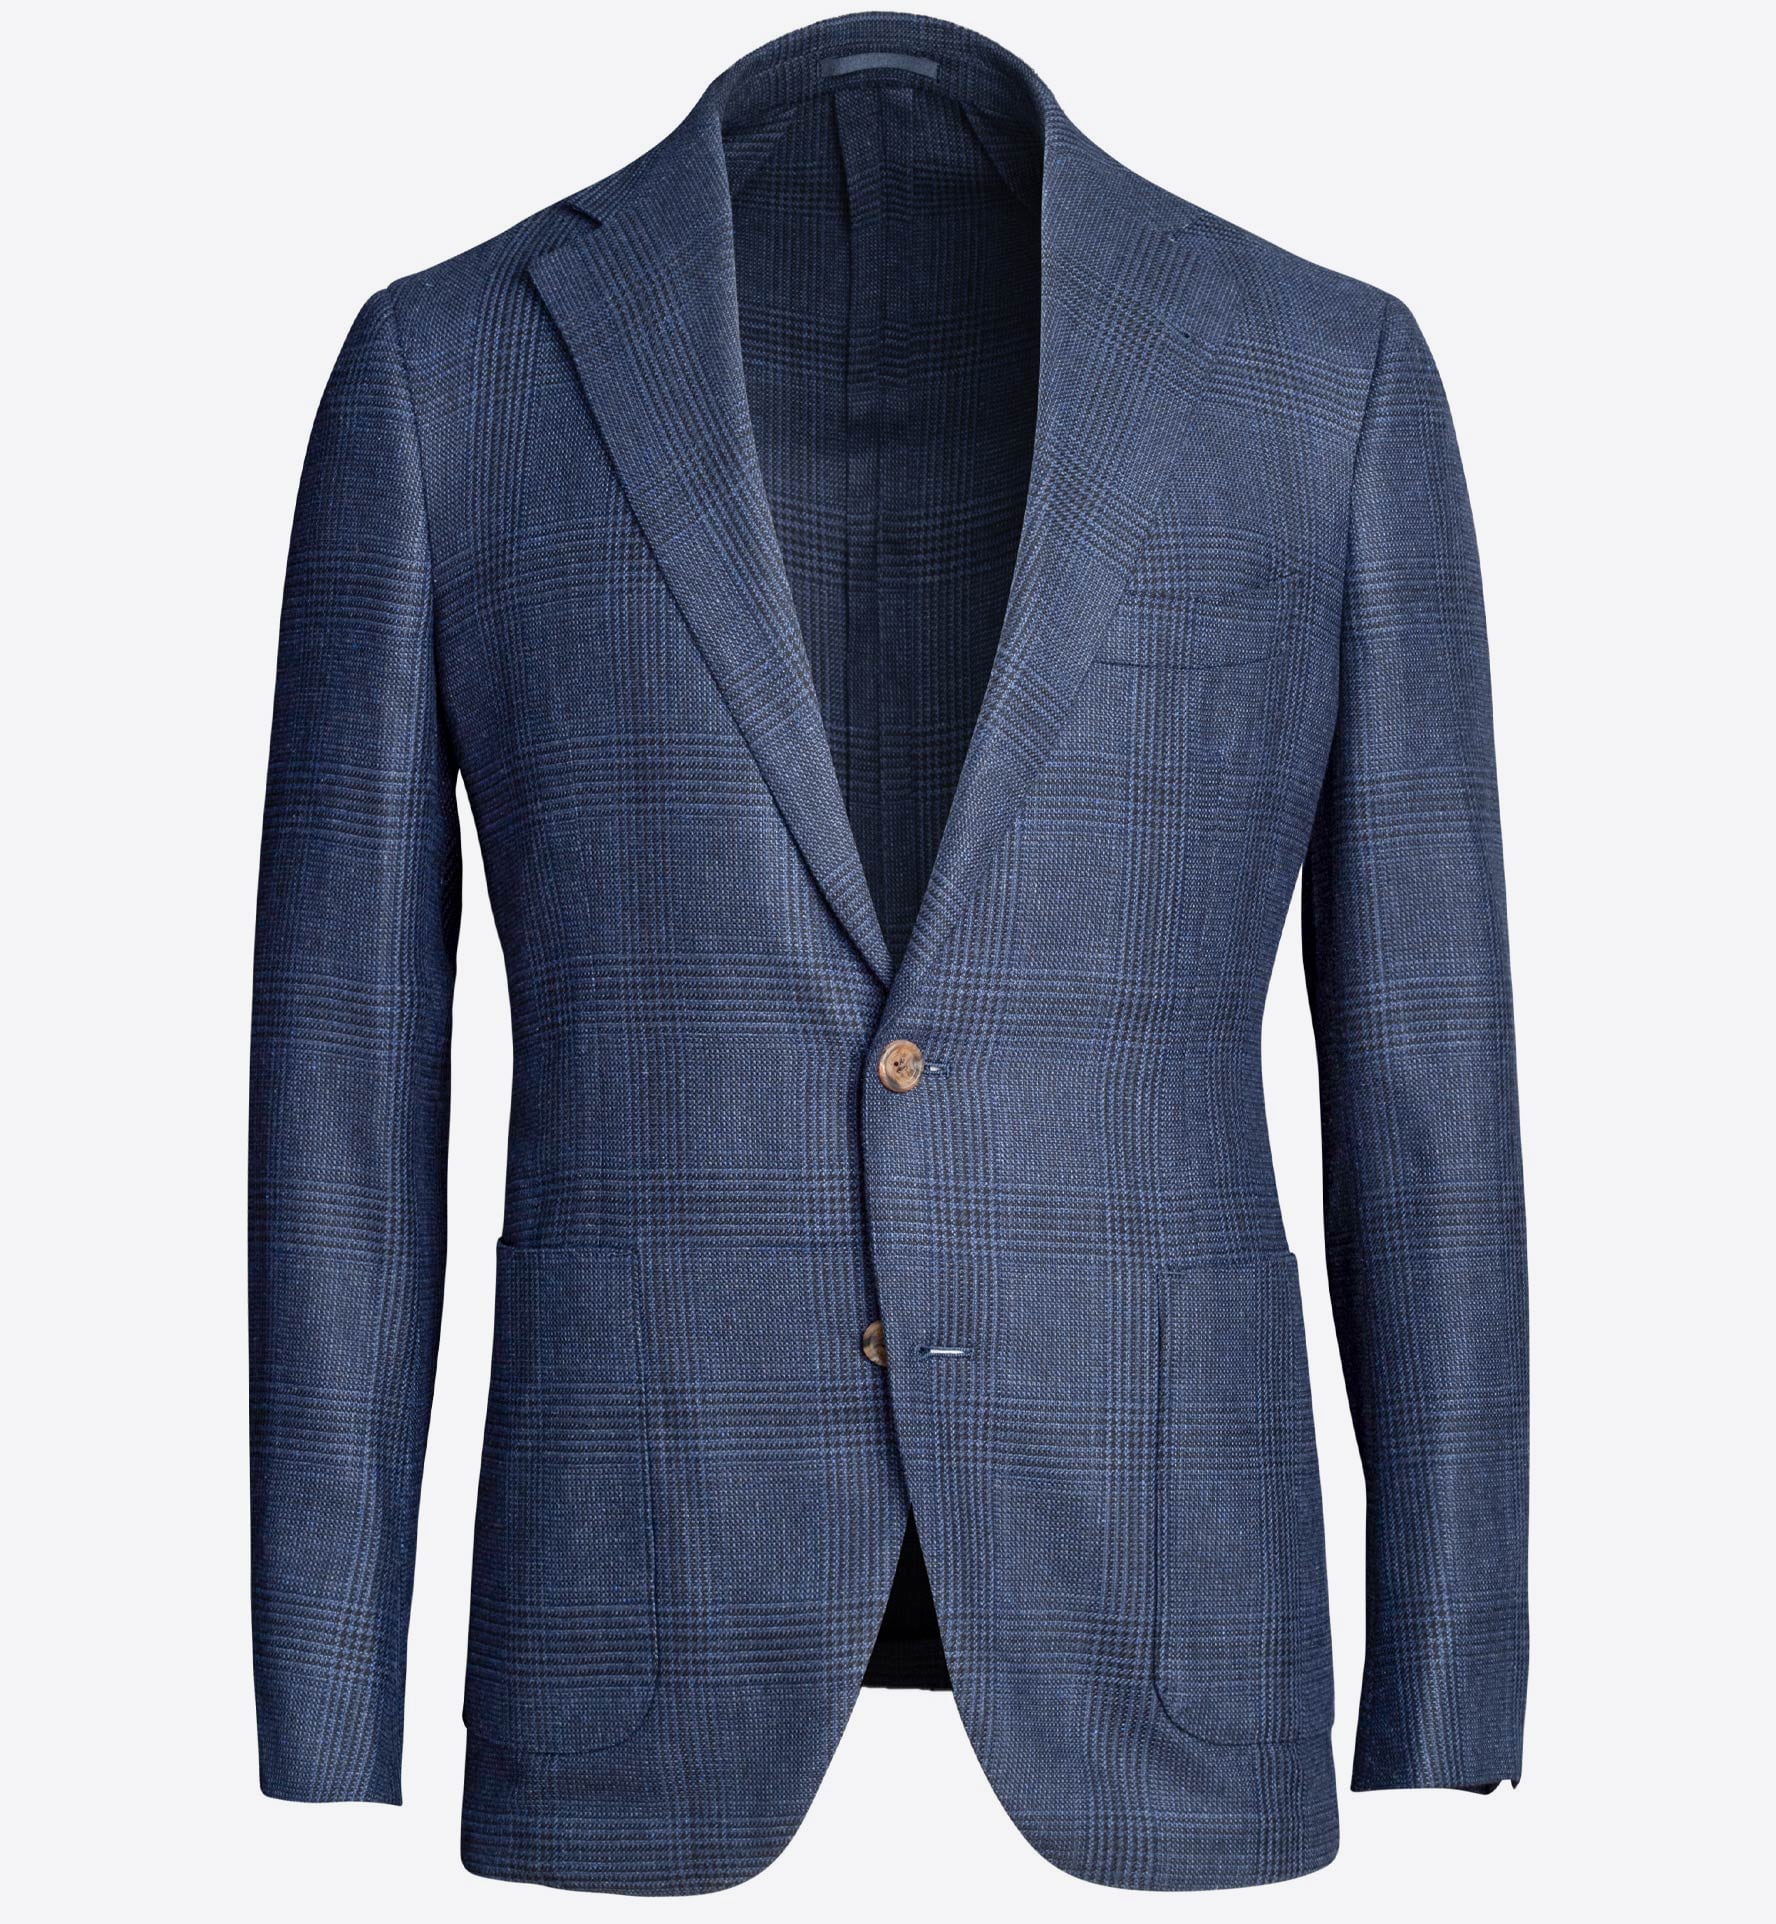 Bedford Navy Glen Plaid Silk and Wool Jacket - Custom Fit Tailored Clothing